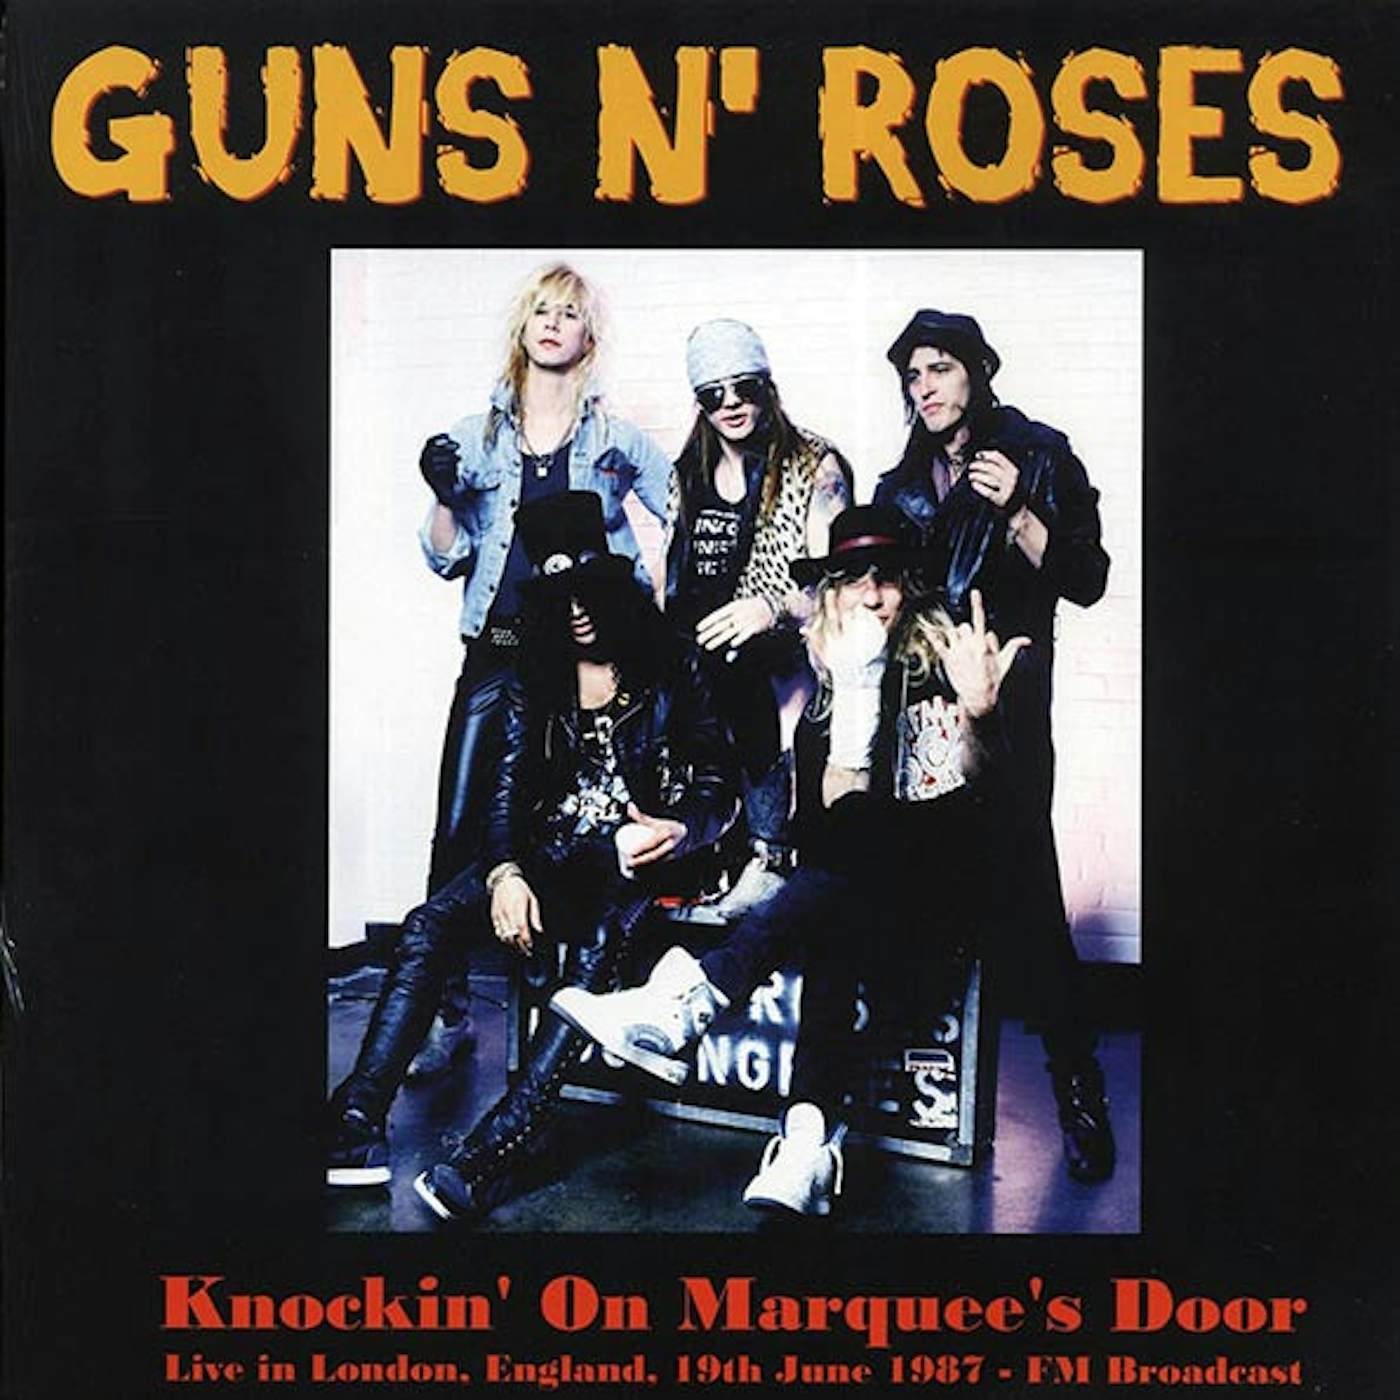 Guns N' Roses  LP -  Knockin' On Marquee's Door: Live In London, England, 19th June 1987 FM Broadcast (ltd. 500 copies made) (Vinyl)